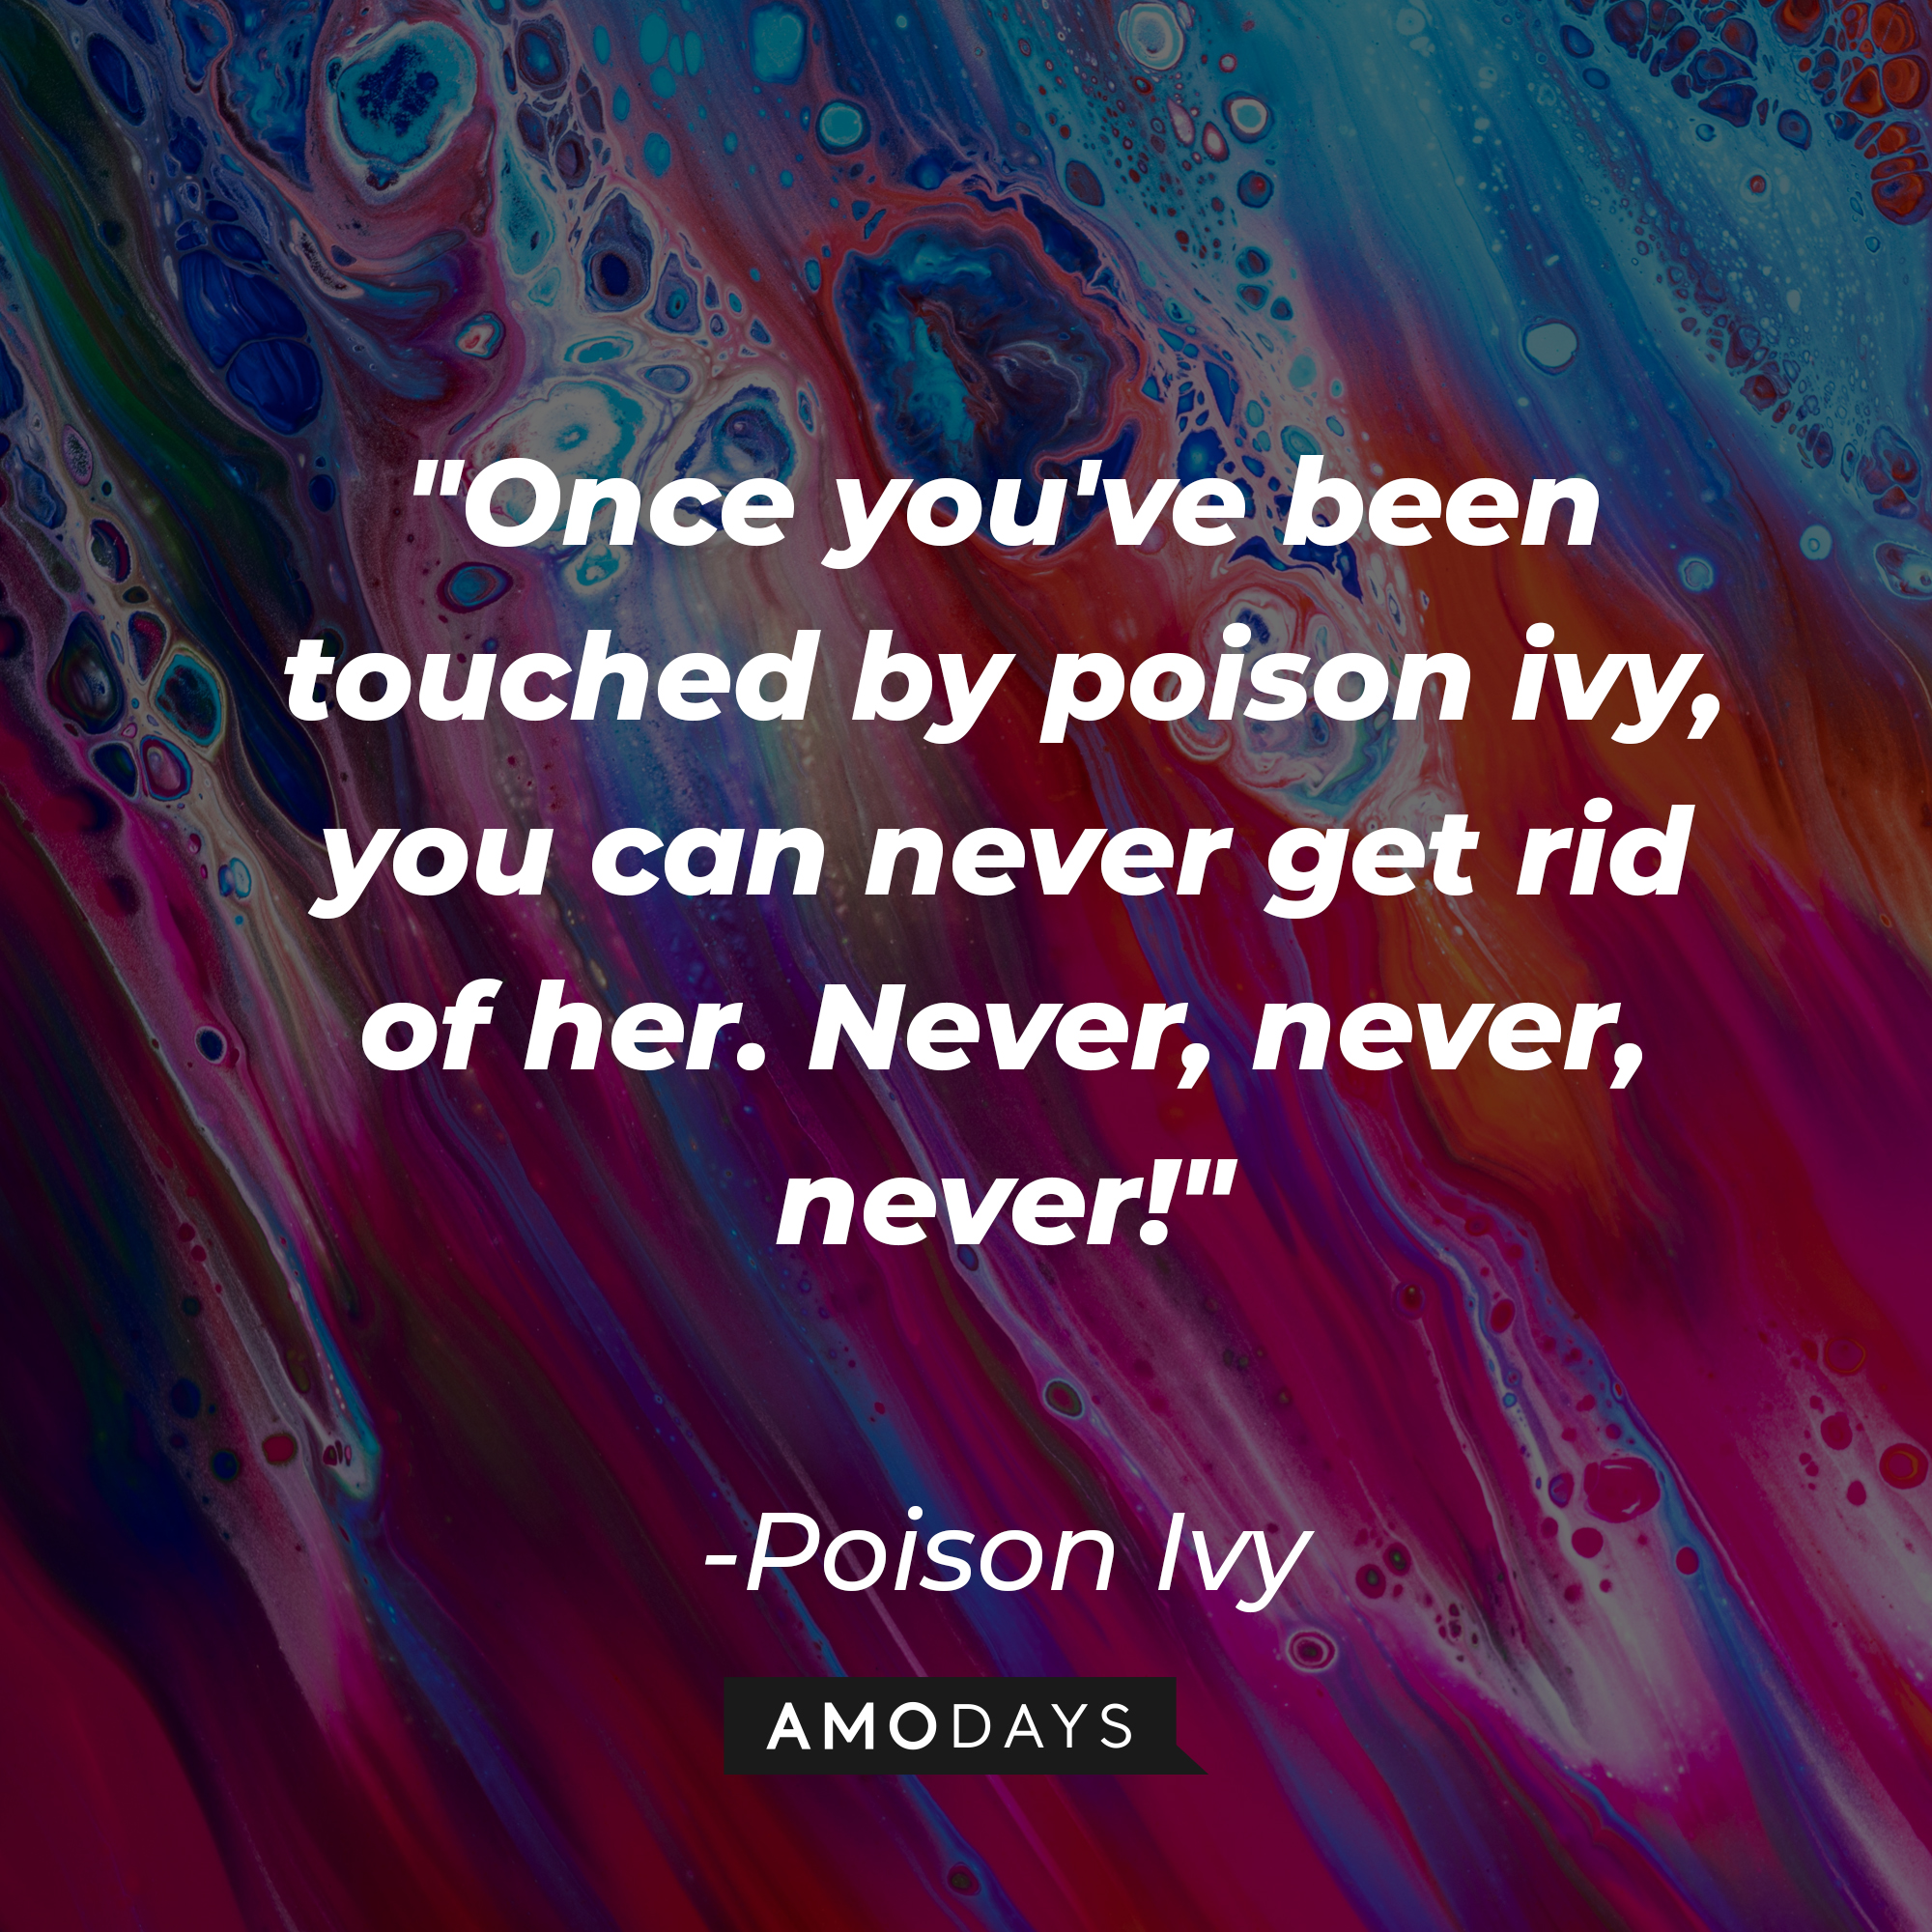 Poison Ivy’s quote: "Once you've been touched by poison ivy, you can never get rid of her. Never, never, never!" | Image: Unsplash